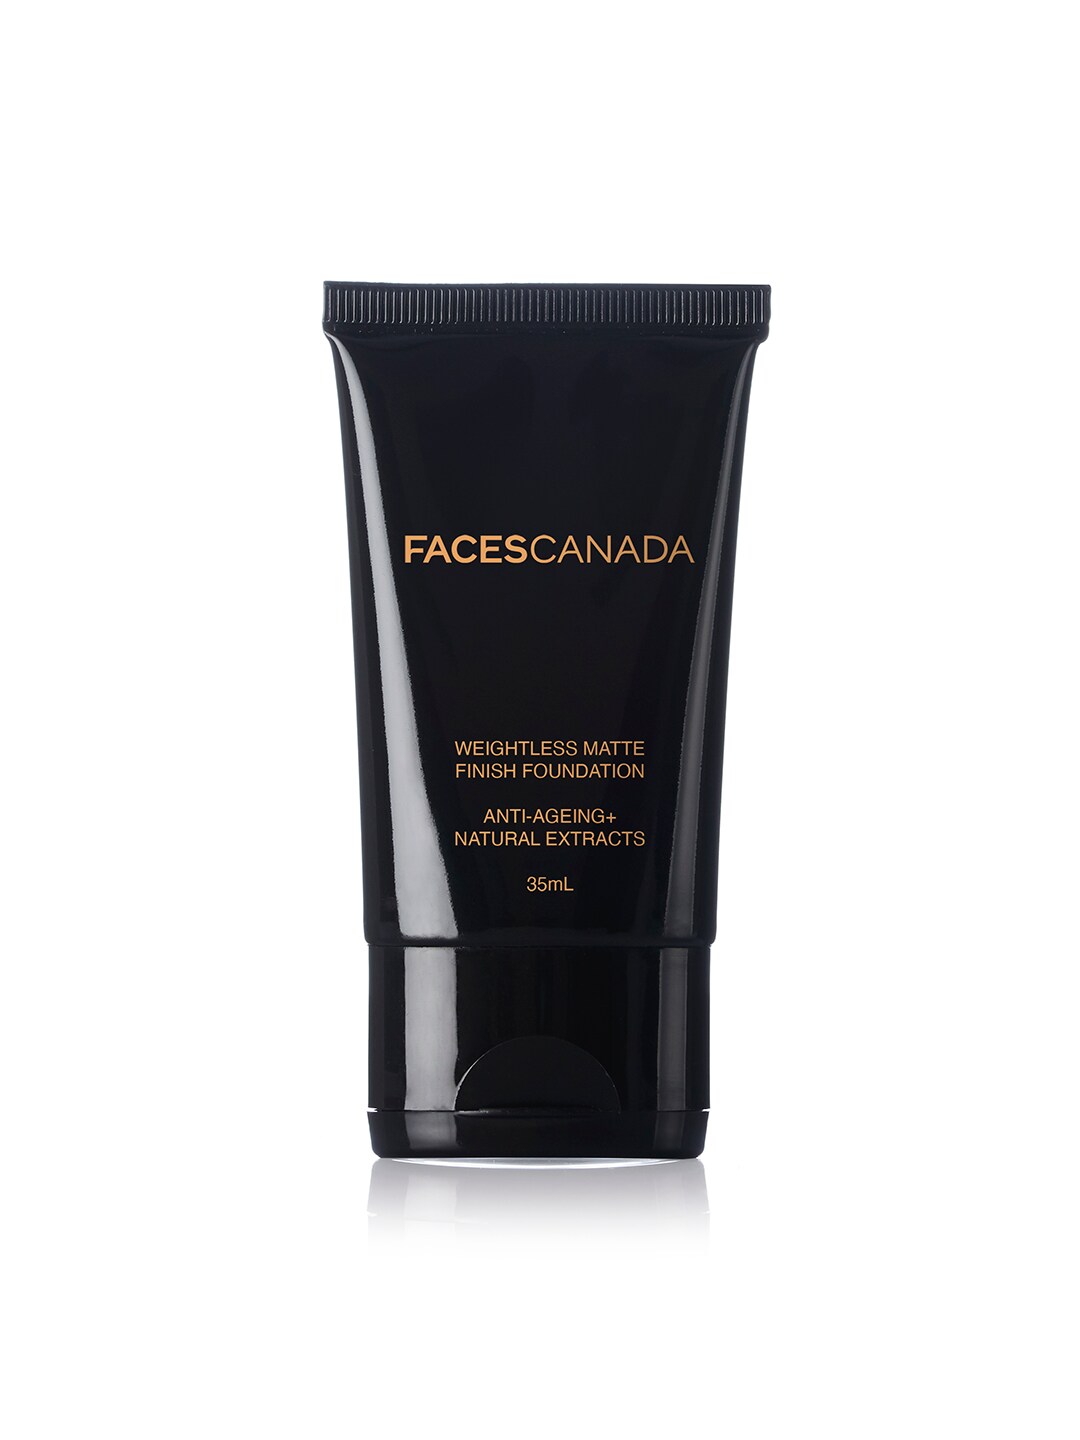 FACES CANADA Weightless Matte Finish Foundation 35ml - Beige 03 Price in India